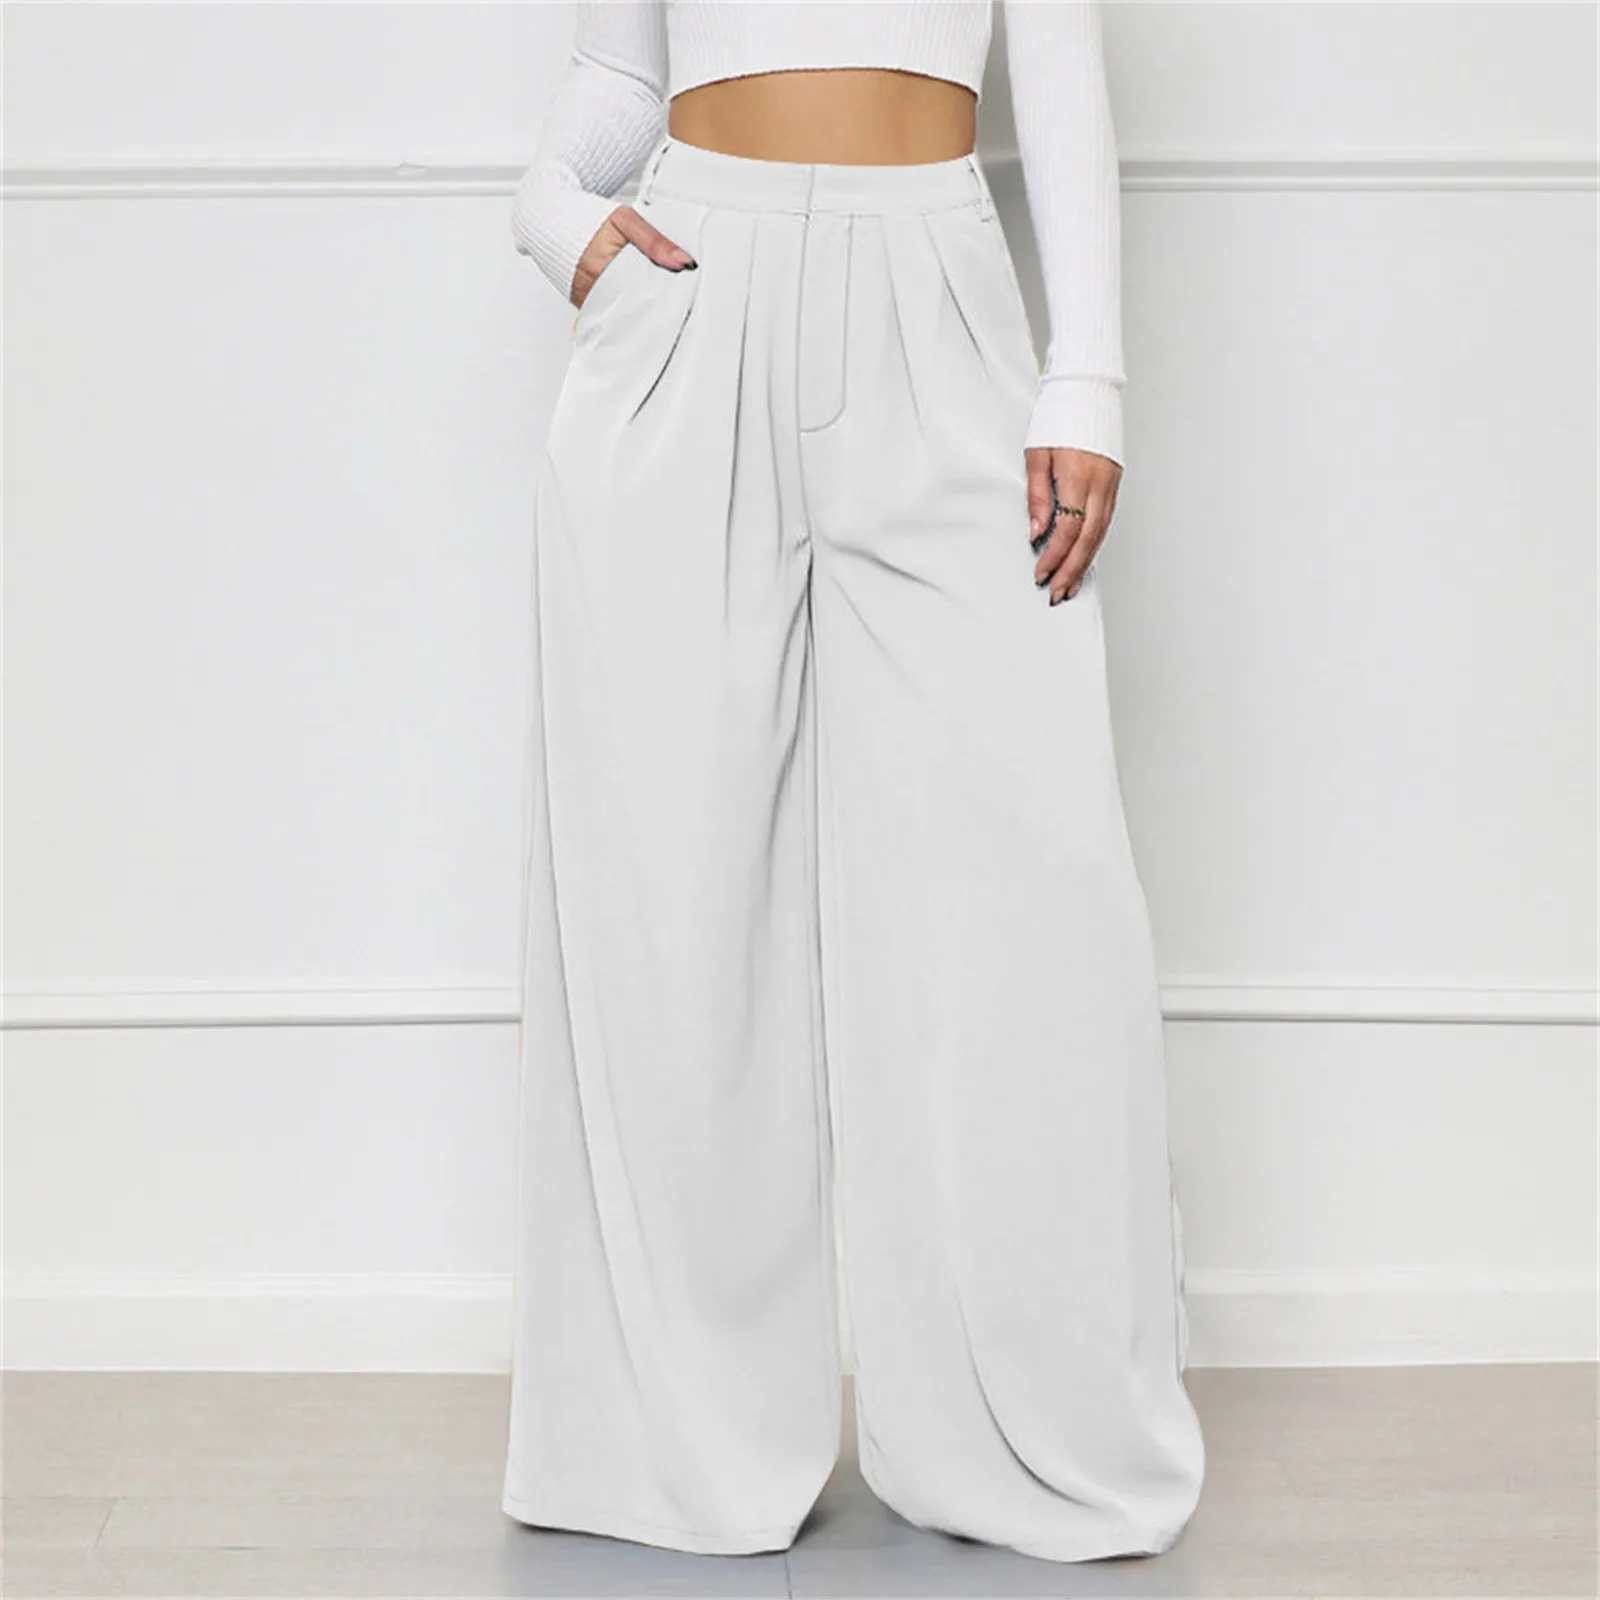 

Women Casual Loose Palazzo Pants Autumn High Waisted Wide Leg Trousers Pleated Long Culottes Pants Elastic Waist Trouser Pockets